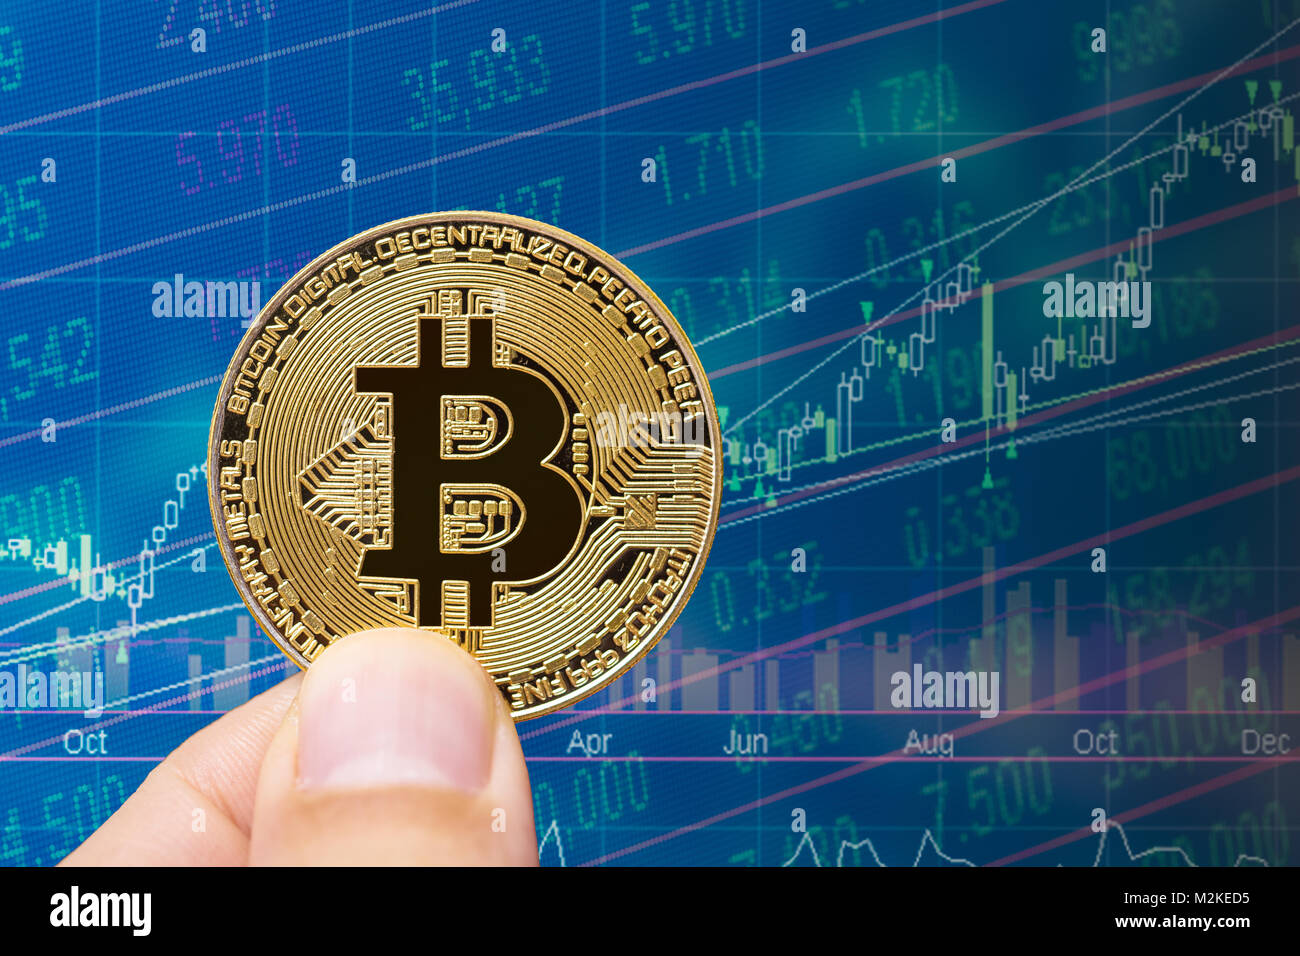 gold bitcoin with financial money exchange marketing digital background Stock Photo